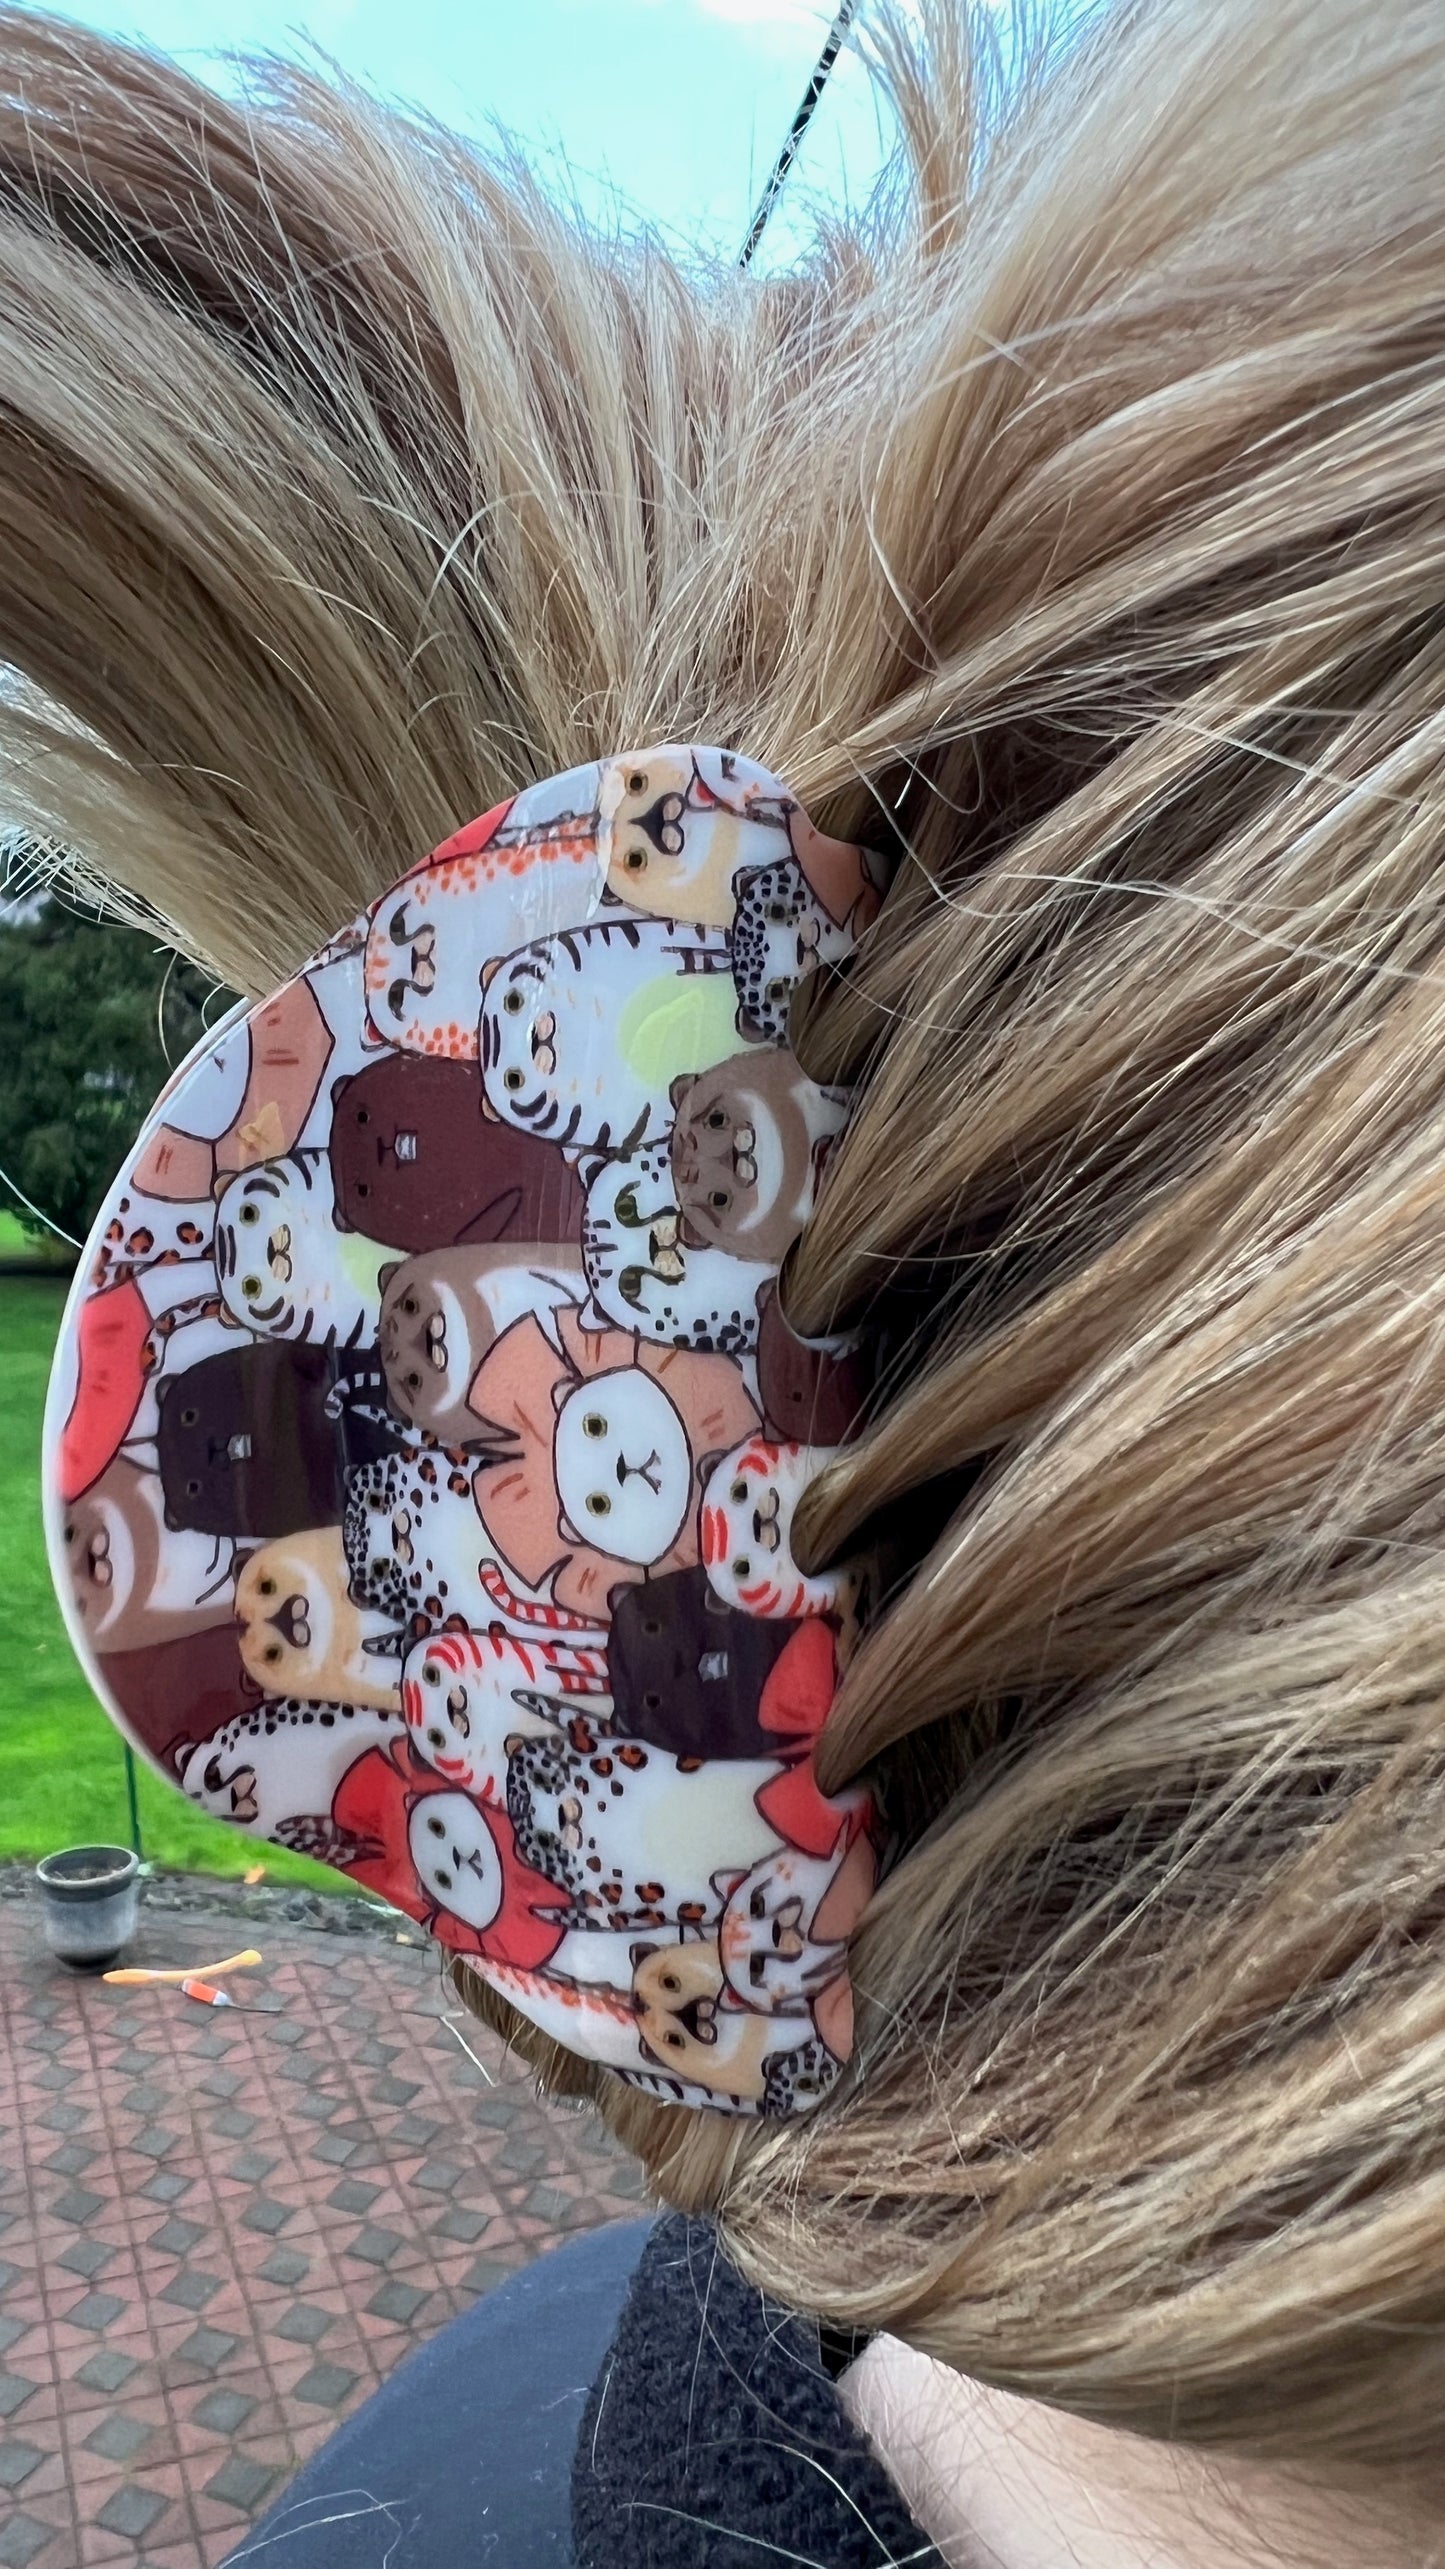 Medium/Large claw style hairclip. Collage of cartoon brown, orange, white, and black cats on it.